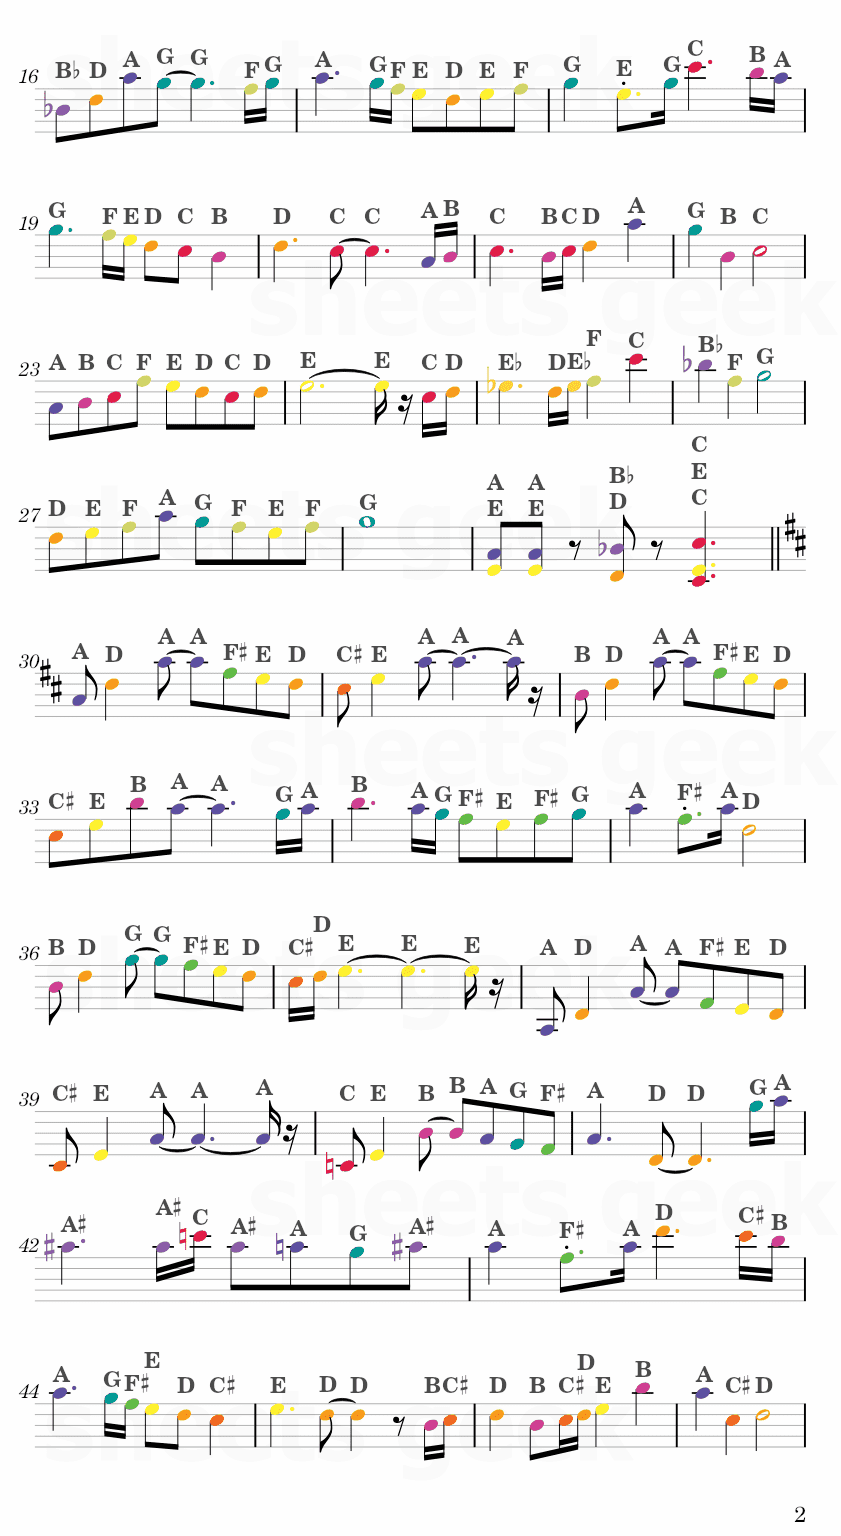 Running Through the New World Kirby and the Forgotten Land Easy Sheet Music Free for piano, keyboard, flute, violin, sax, cello page 2